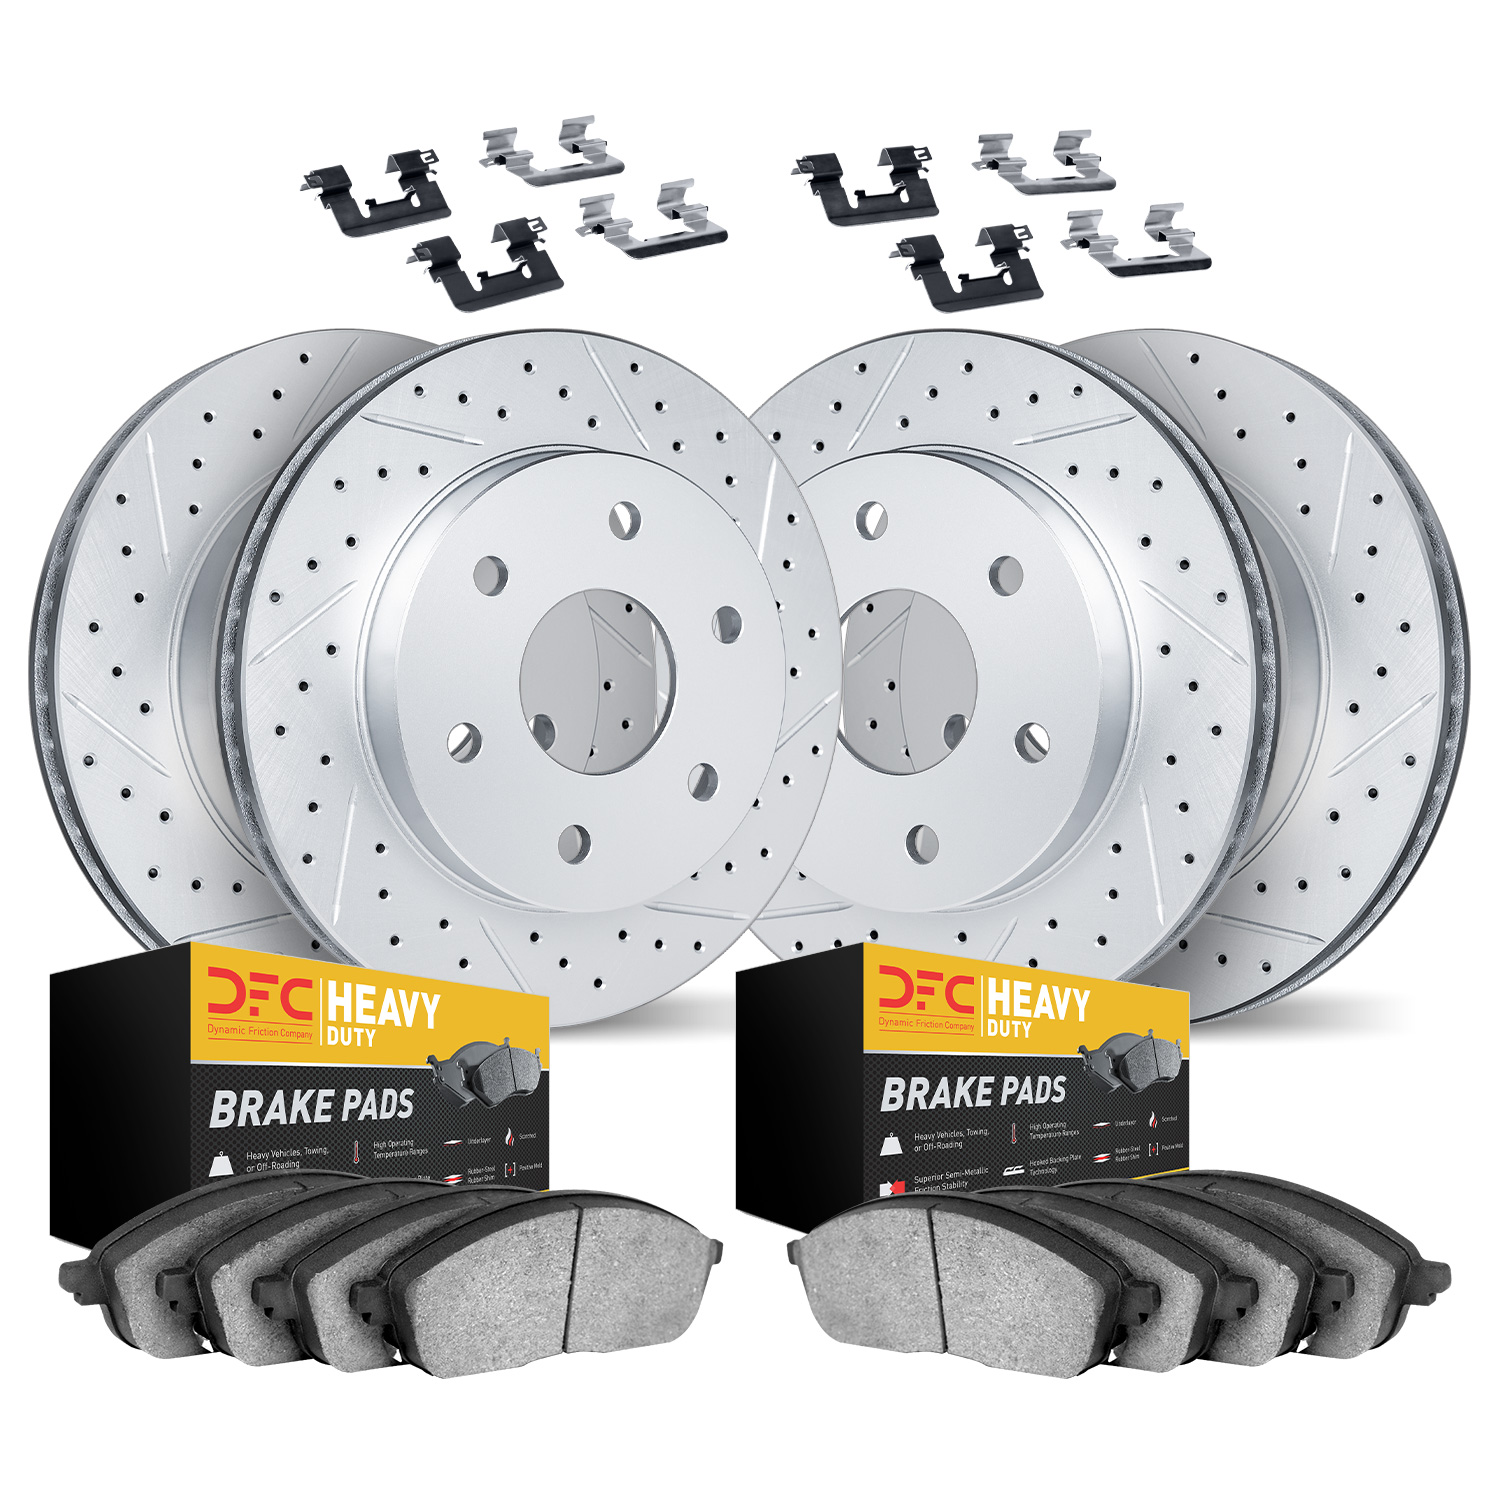 2214-99069 Geoperformance Drilled/Slotted Rotors w/Heavy-Duty Pads Kit & Hardware, 2004-2008 Ford/Lincoln/Mercury/Mazda, Positio